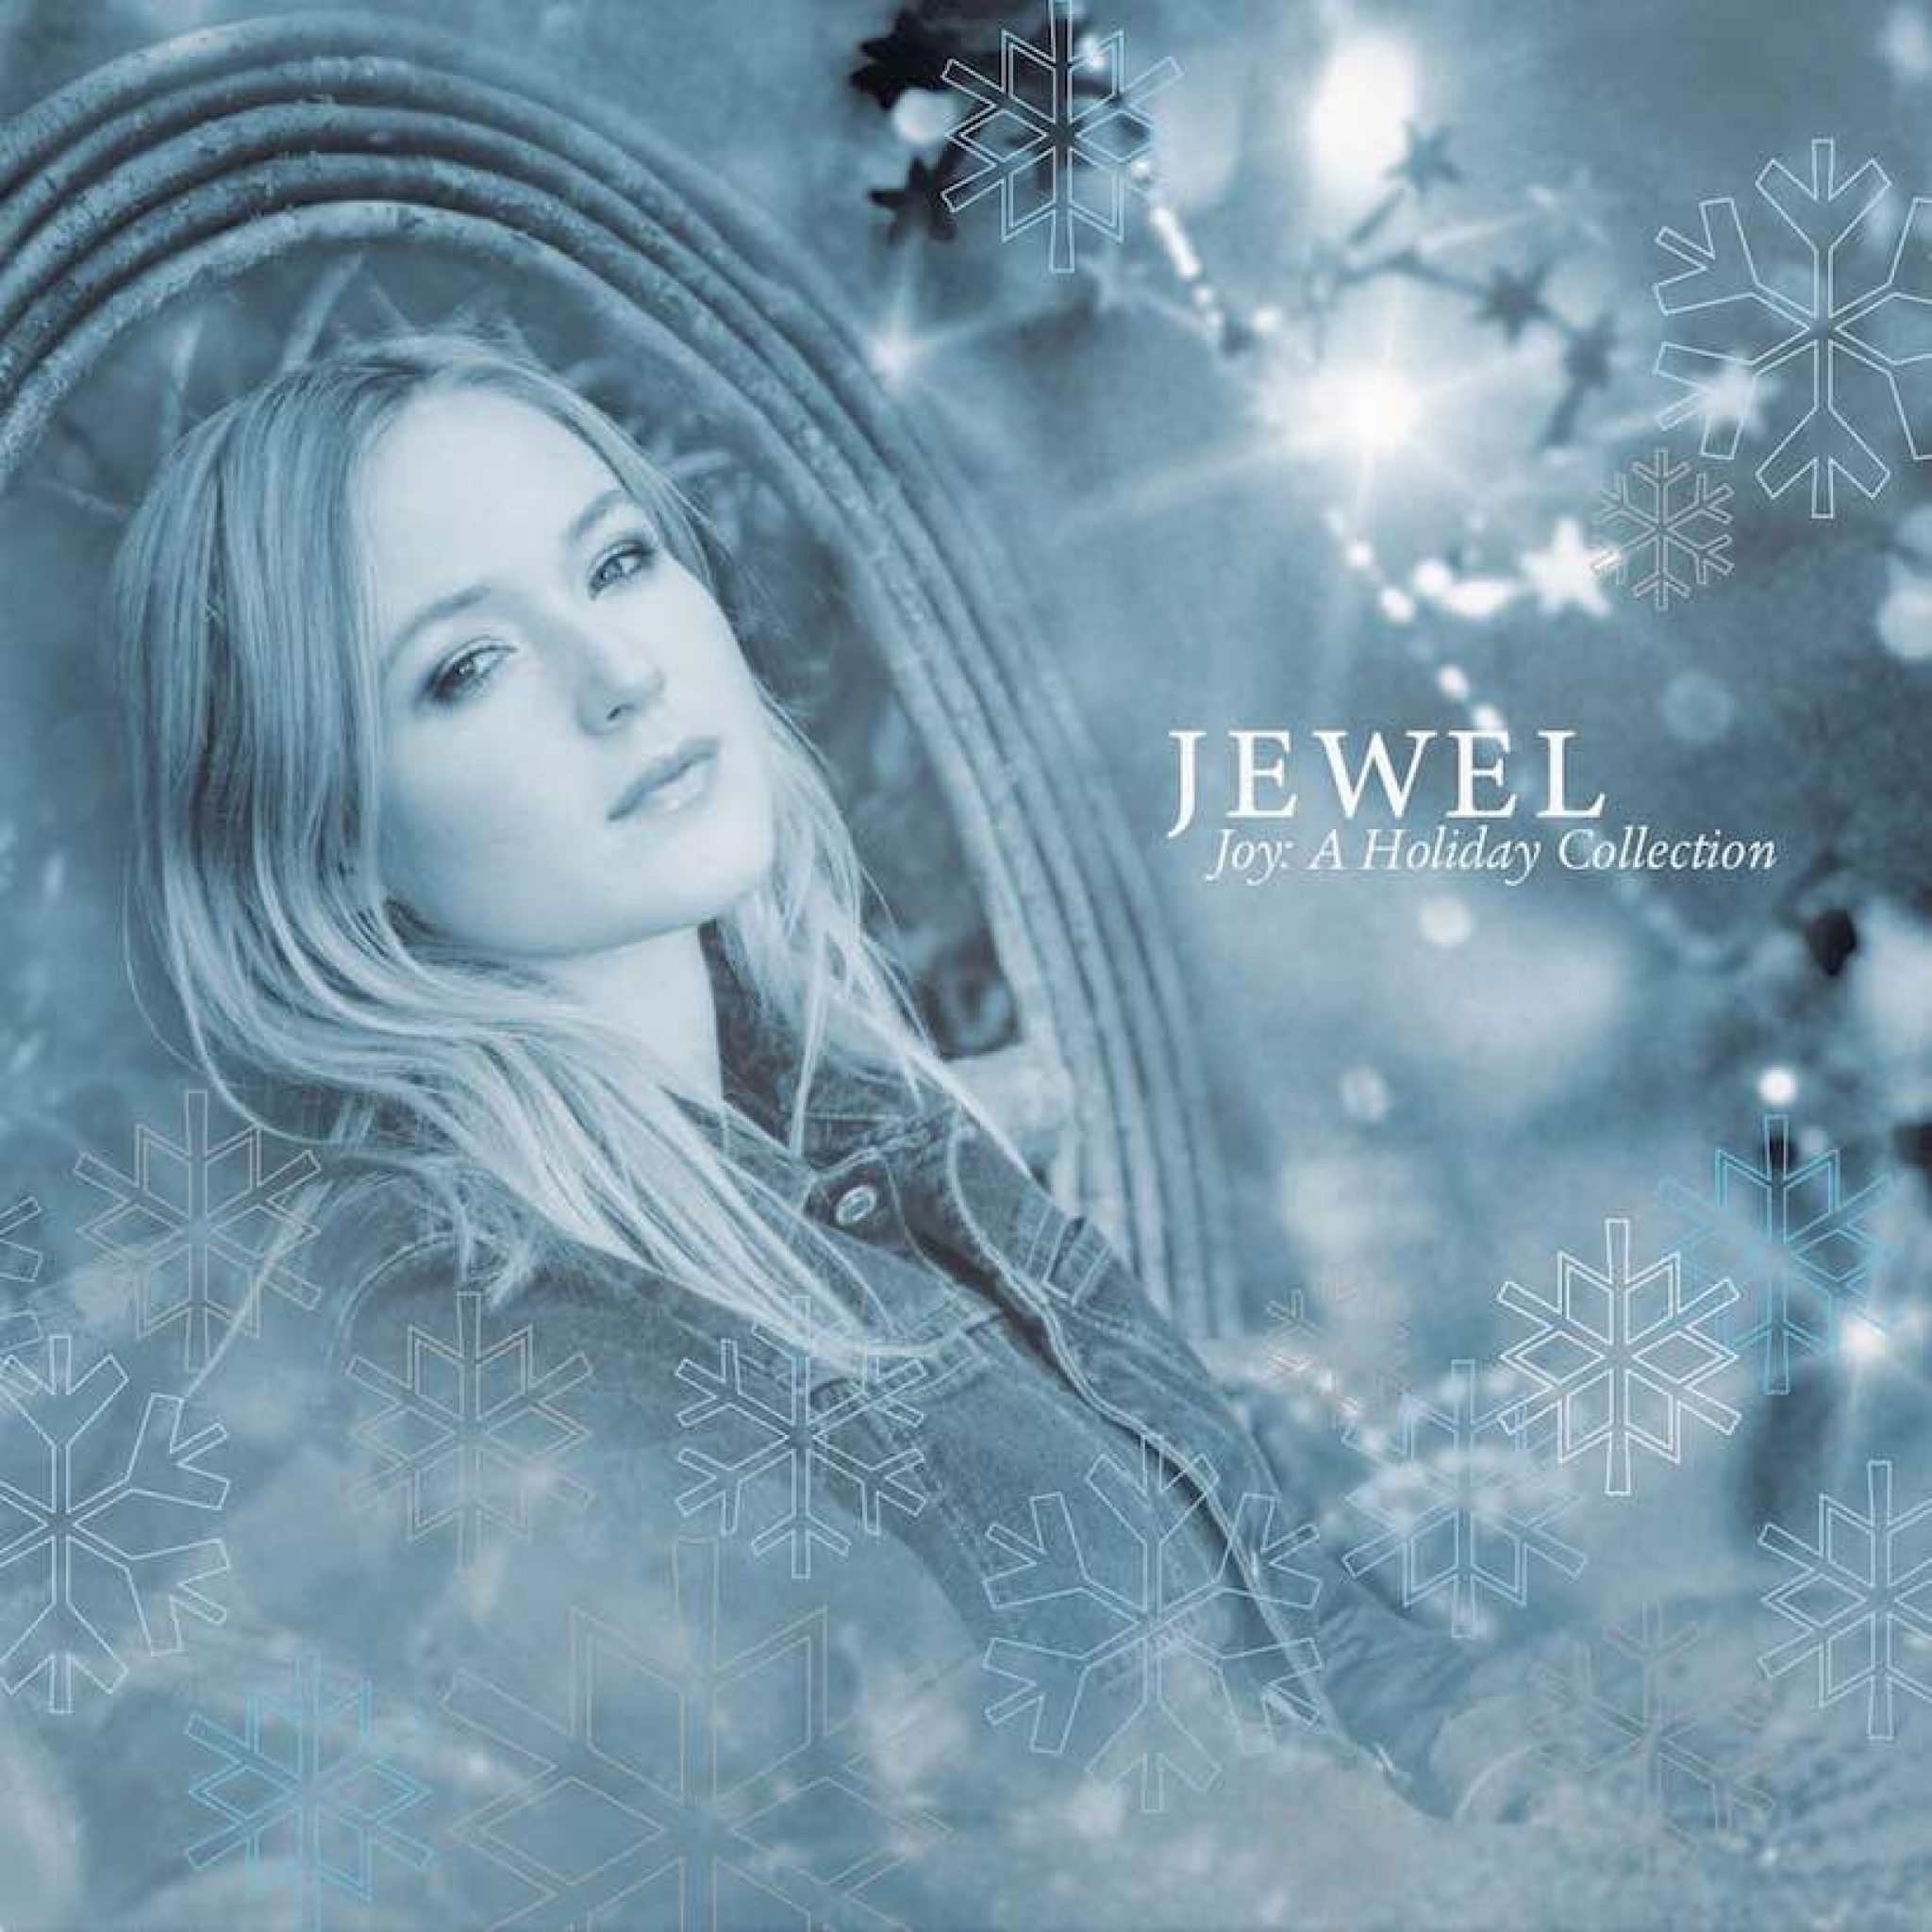 First Vinyl Release For Jewel's 'Joy A Holiday Collection' Album